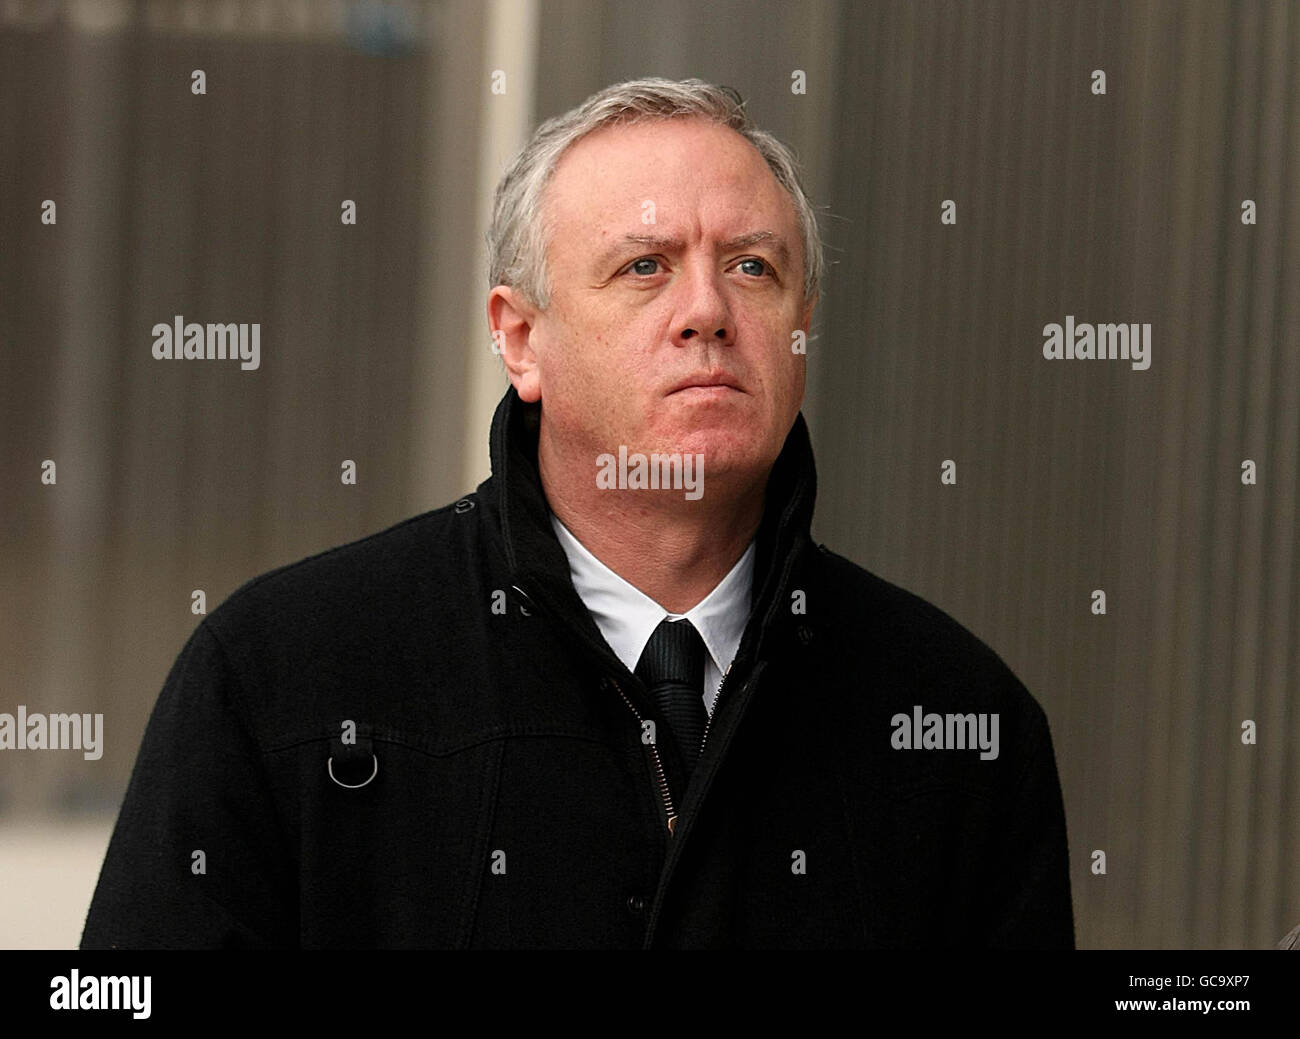 Eamon Lillis who is charged with murdering his wife Celine Cawley arriving at the Criminal Courts of the Justice,Dublin where the jury are expected to begin deliberating. Stock Photo